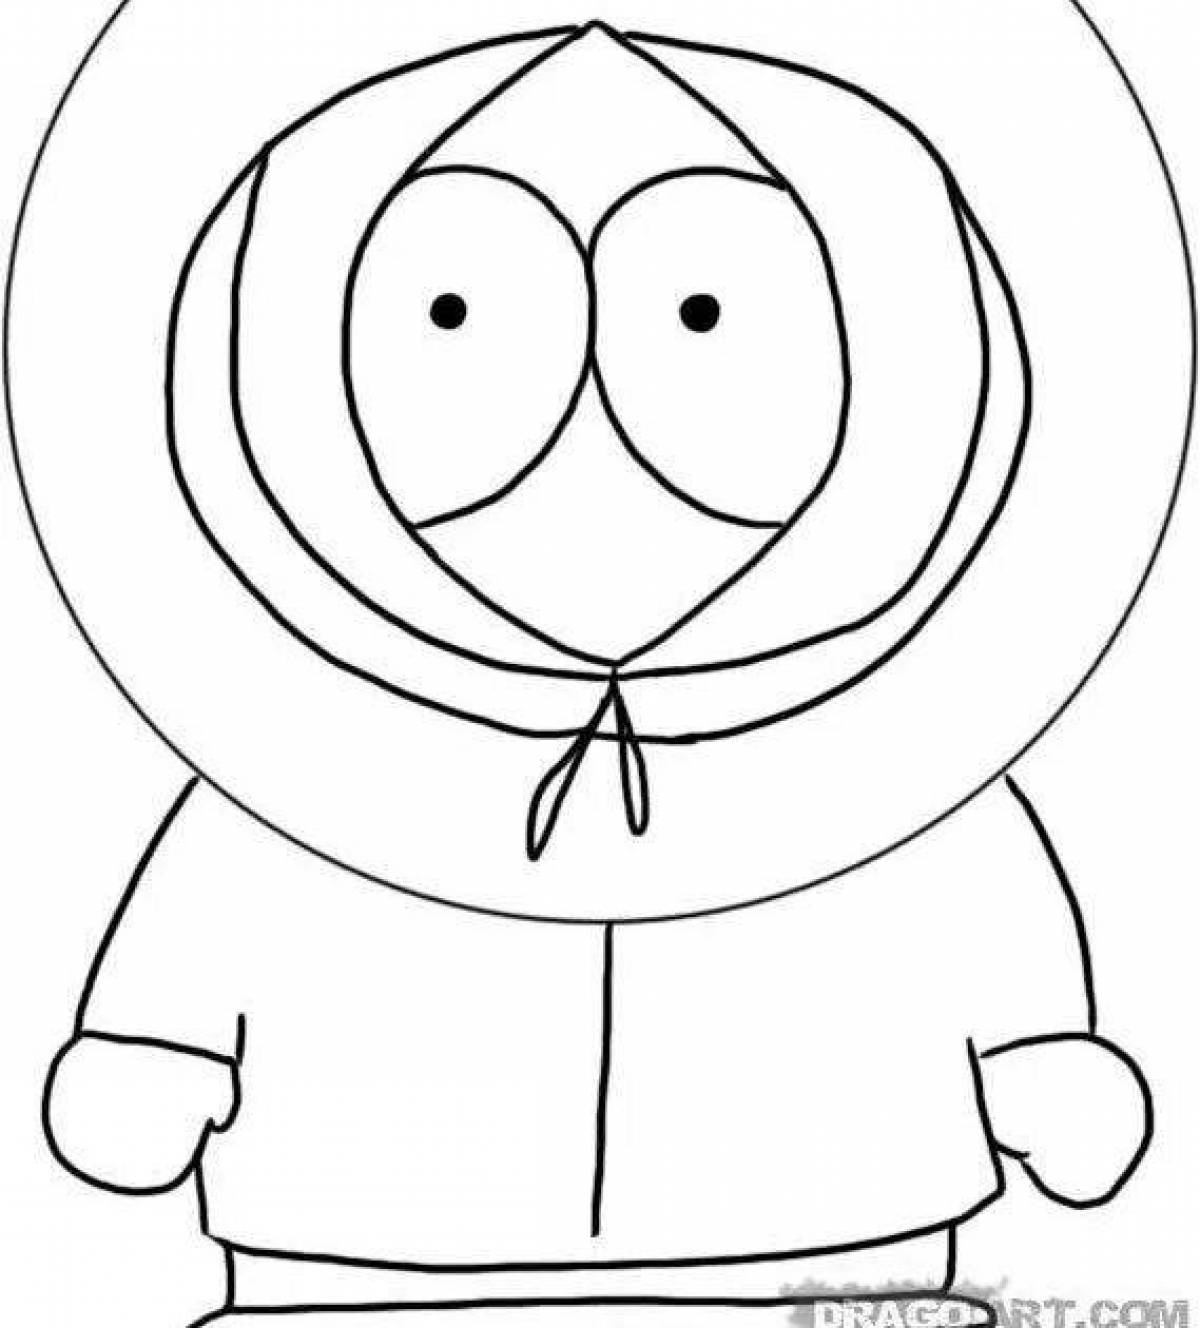 Colorful kenny coloring page